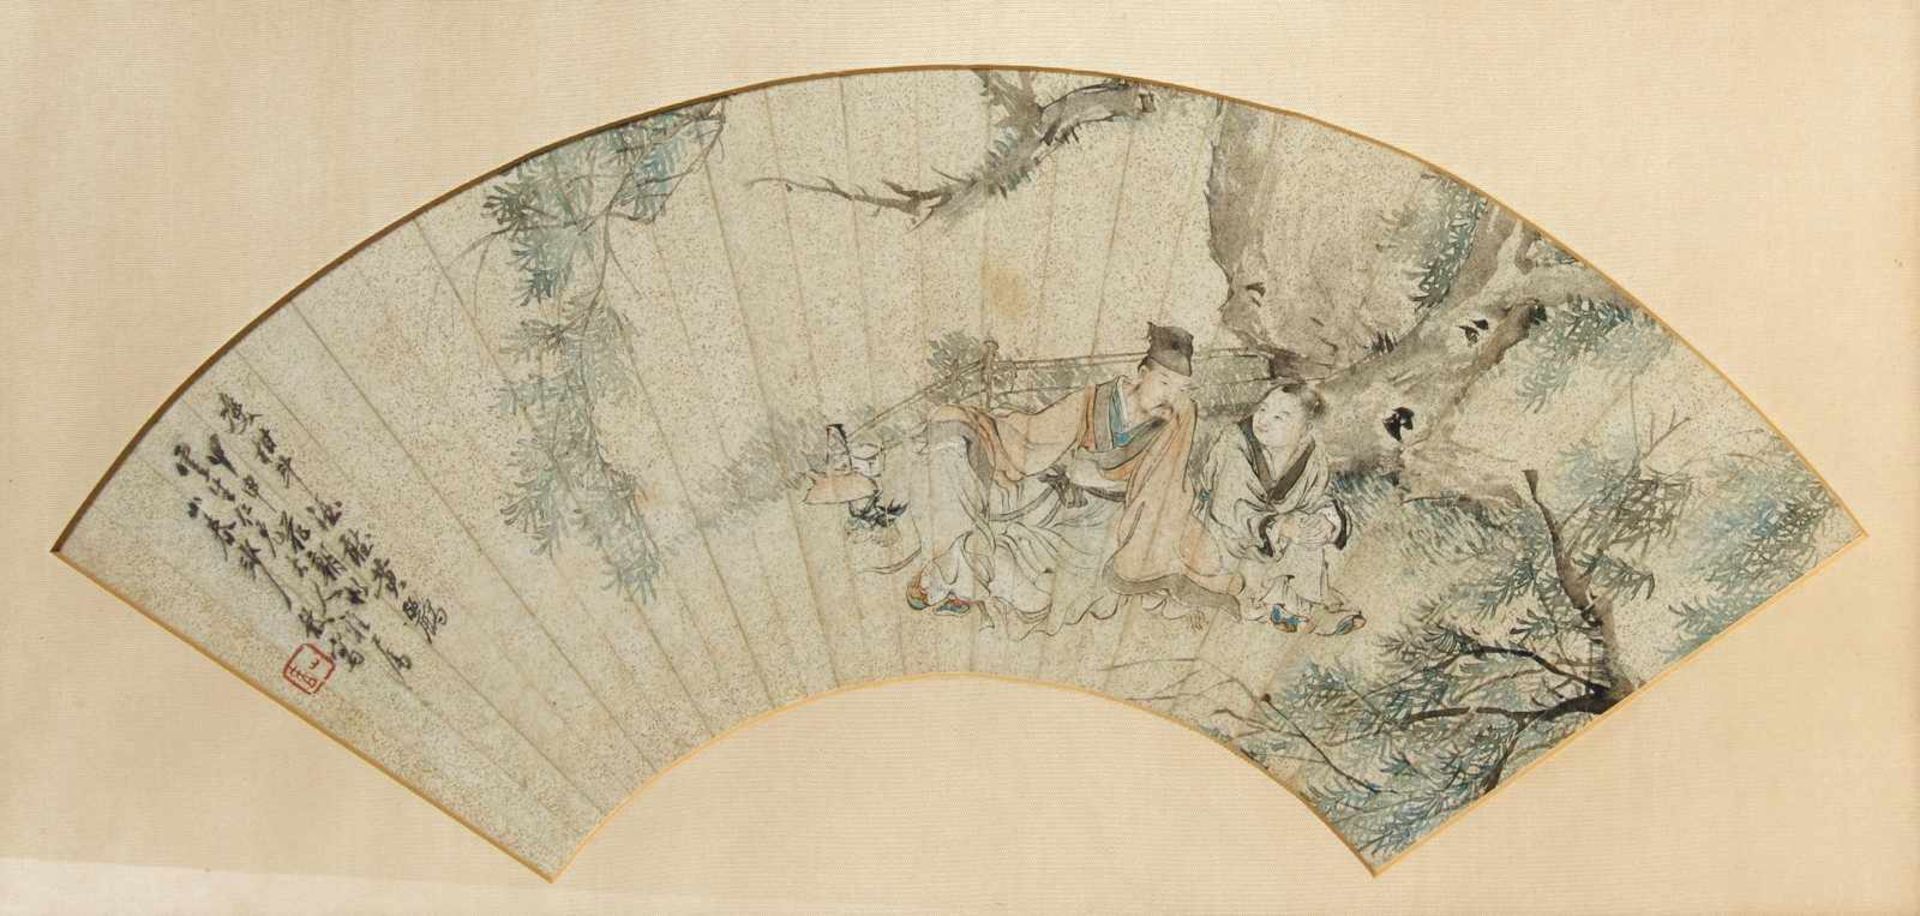 TWO FAN PAINTINGS. China. 19th c. Ink and color on paper. Mounted with passe-partout on cardboard,